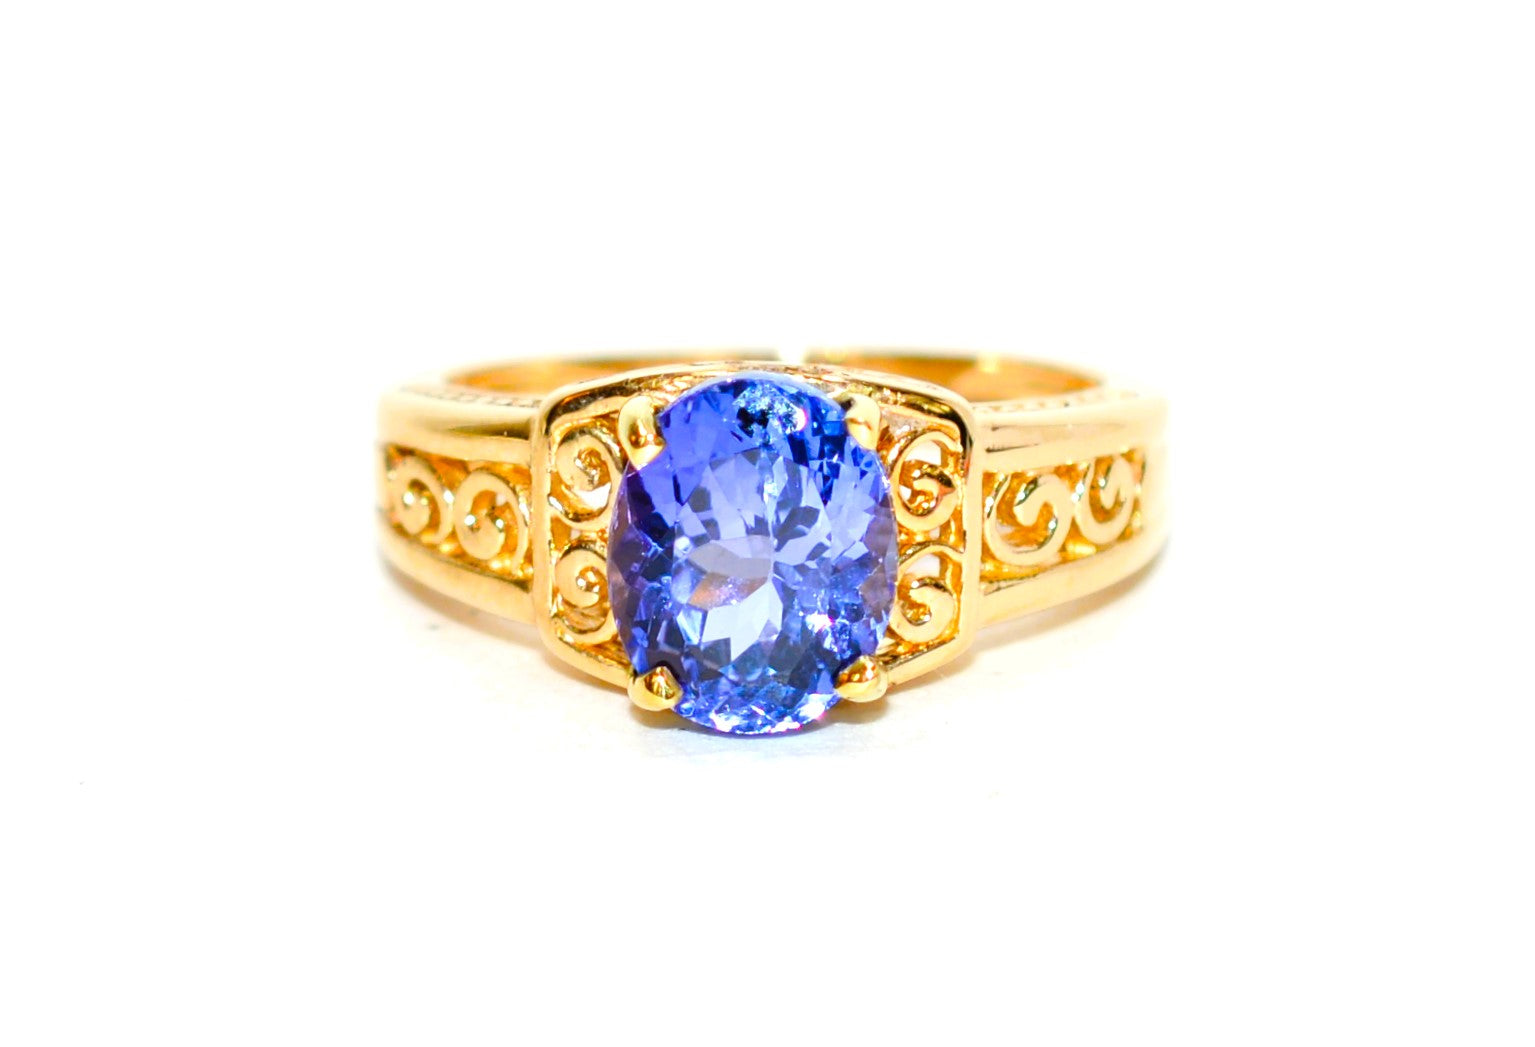 Certified Natural Tanzanite Ring 14K Solid Gold 2.69ct Solitaire Ring Vintage Ring December Birthstone Ring Estate Jewelry Jewellery